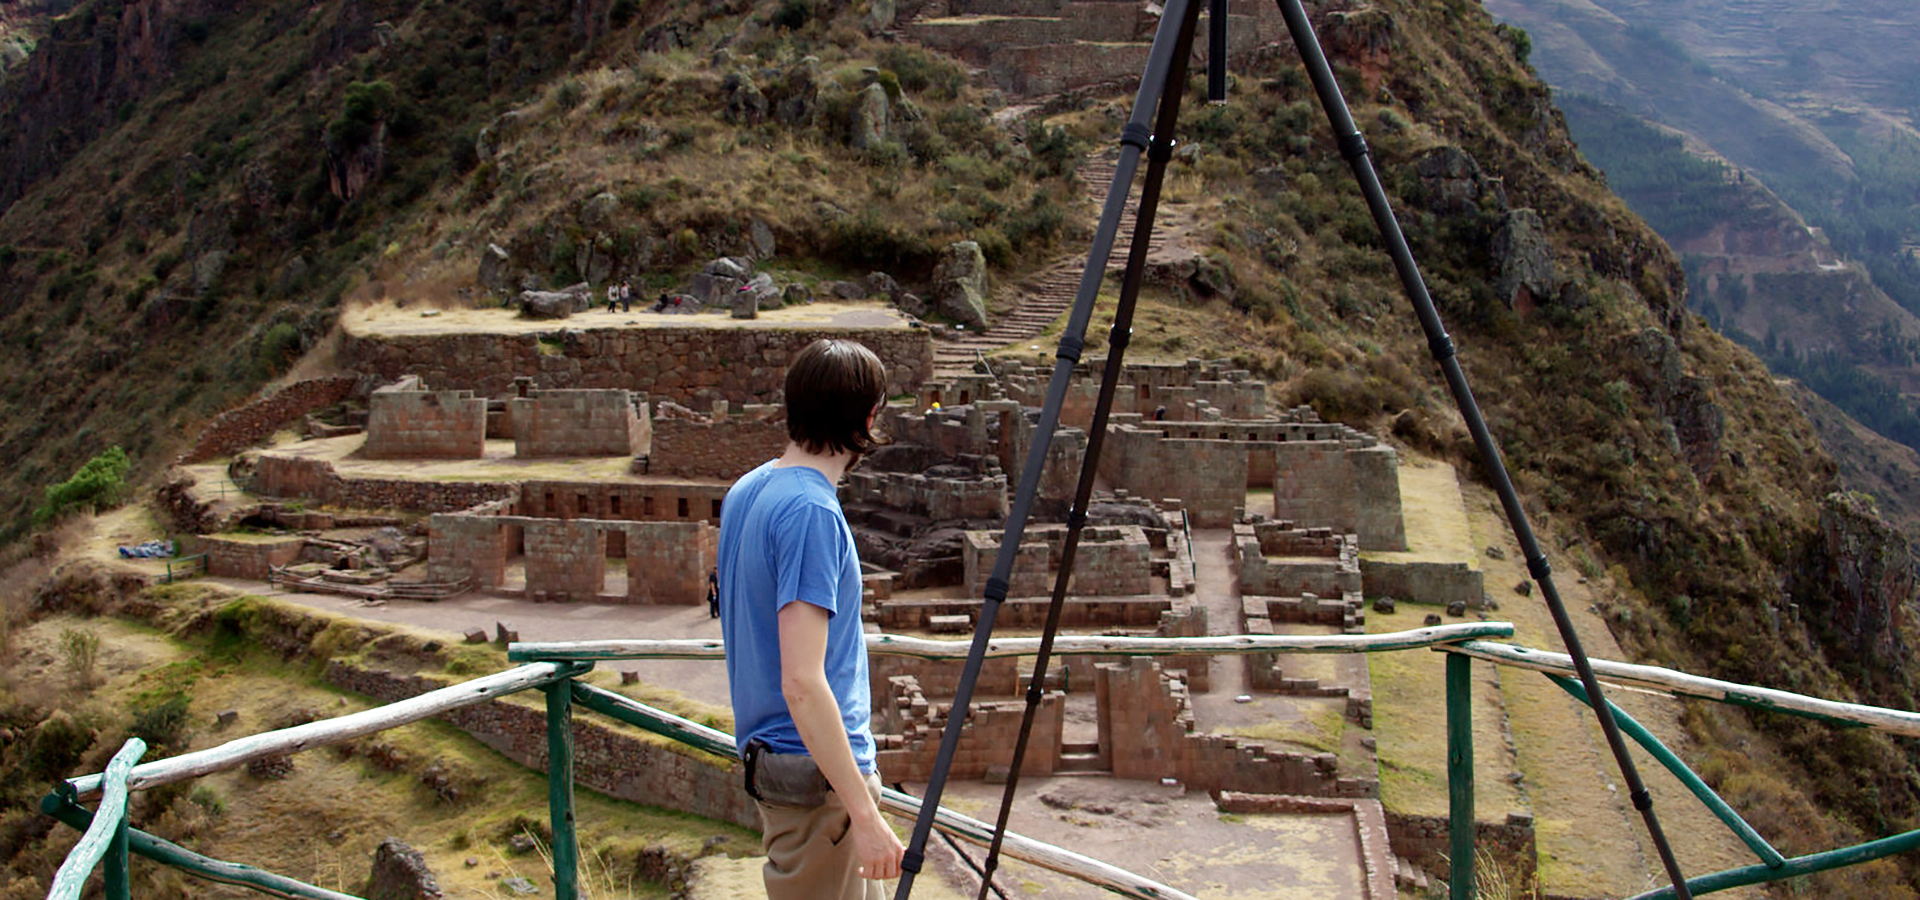 Jon Blundell, a 3D digitization specialist at the Smithsonian, capturing 3D data points of the Inka archaeological site at Pisac. Pisac, Peru, 2014. Photo by Samy Chiclla